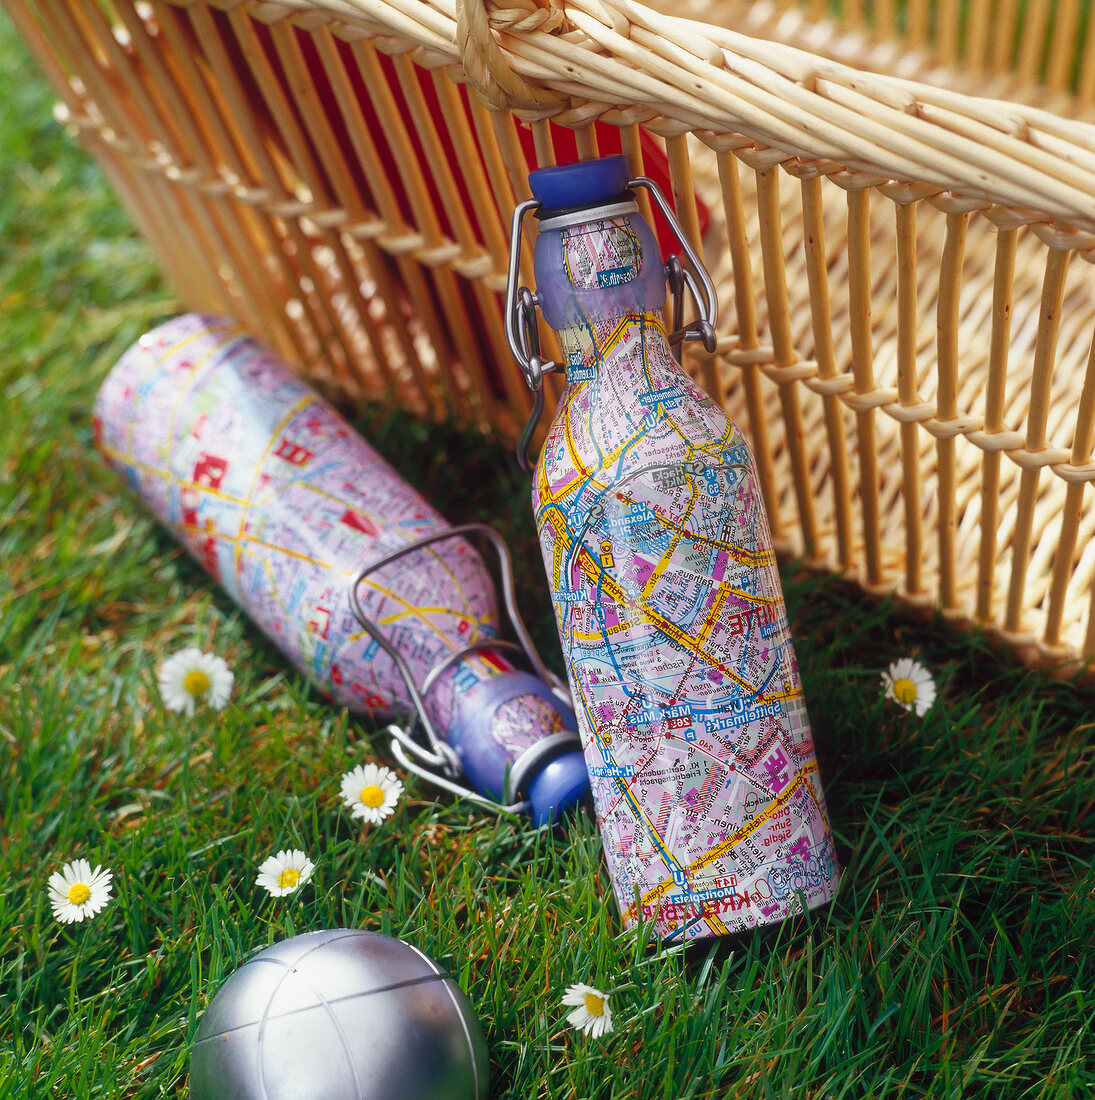 Two aluminium cylinders with map printings next to wicker basket on grass